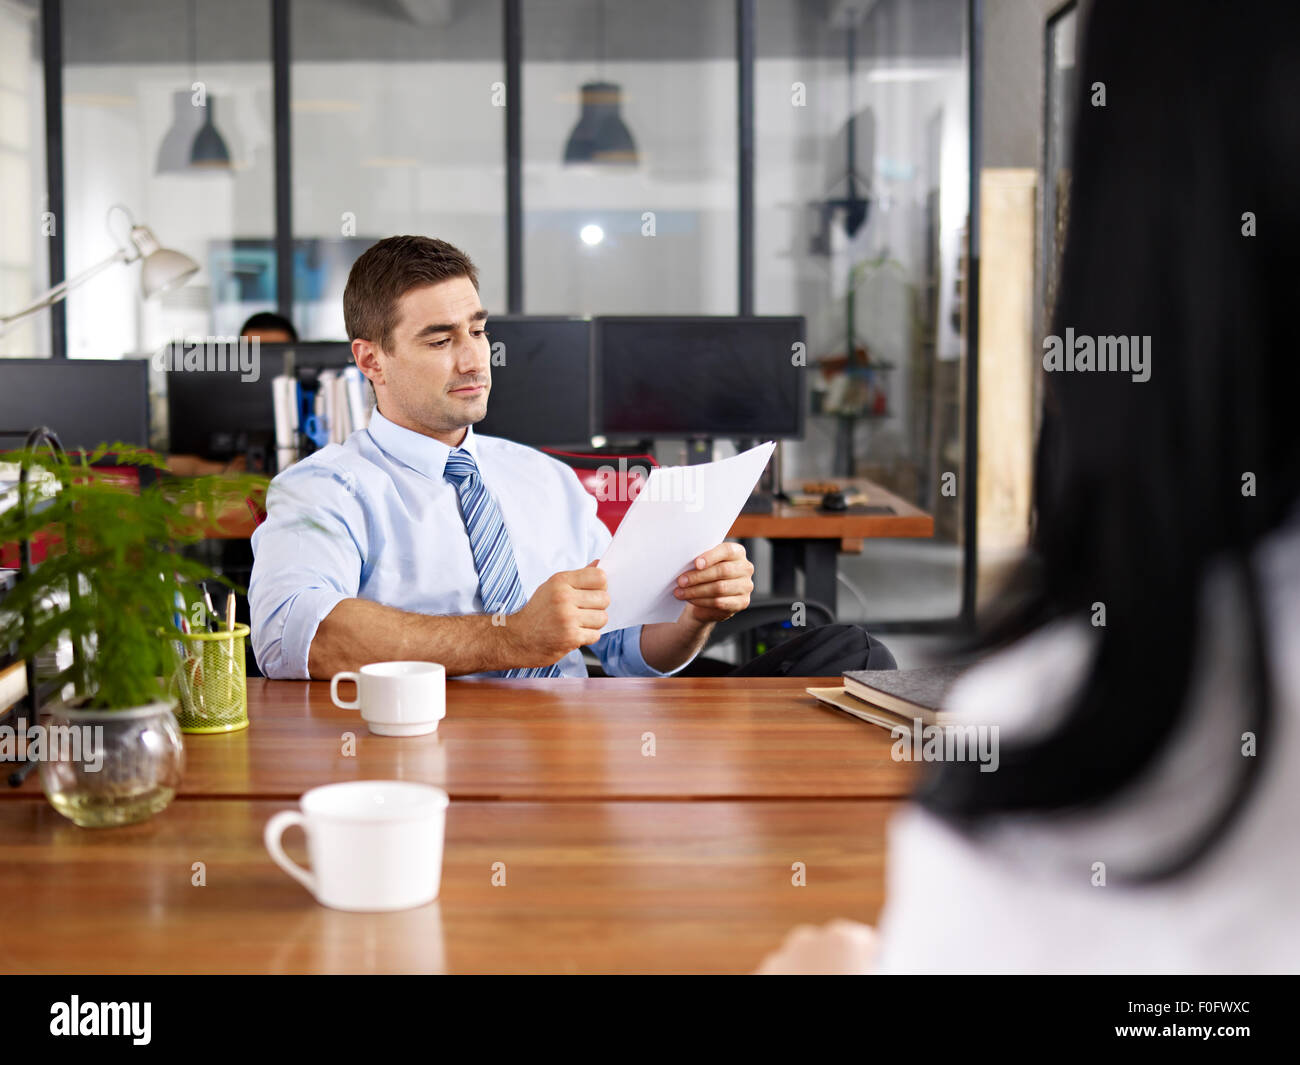 caucasian HR manager conducting an interview Stock Photo